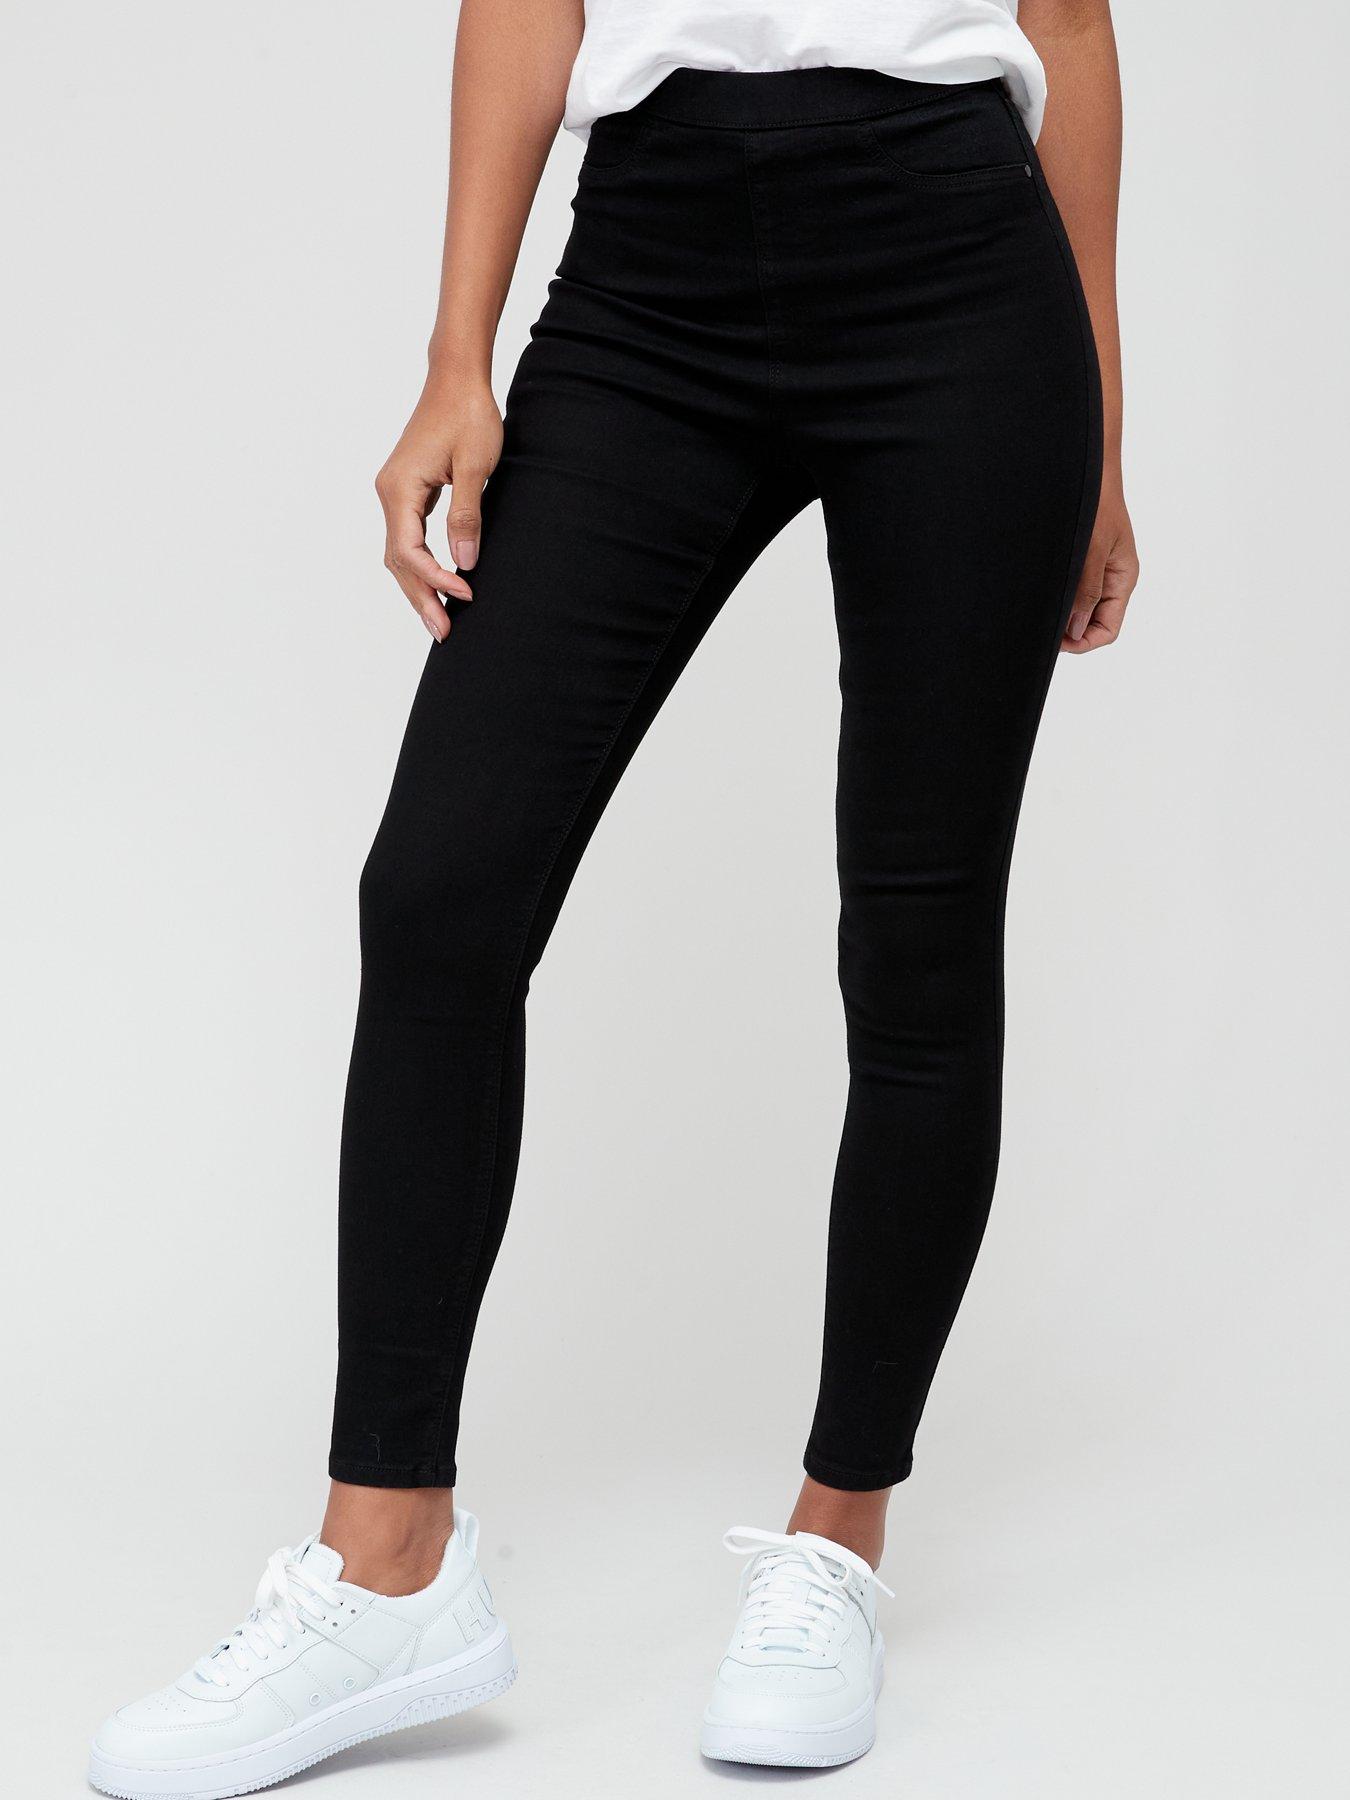 Ladies High Waisted Jeggings